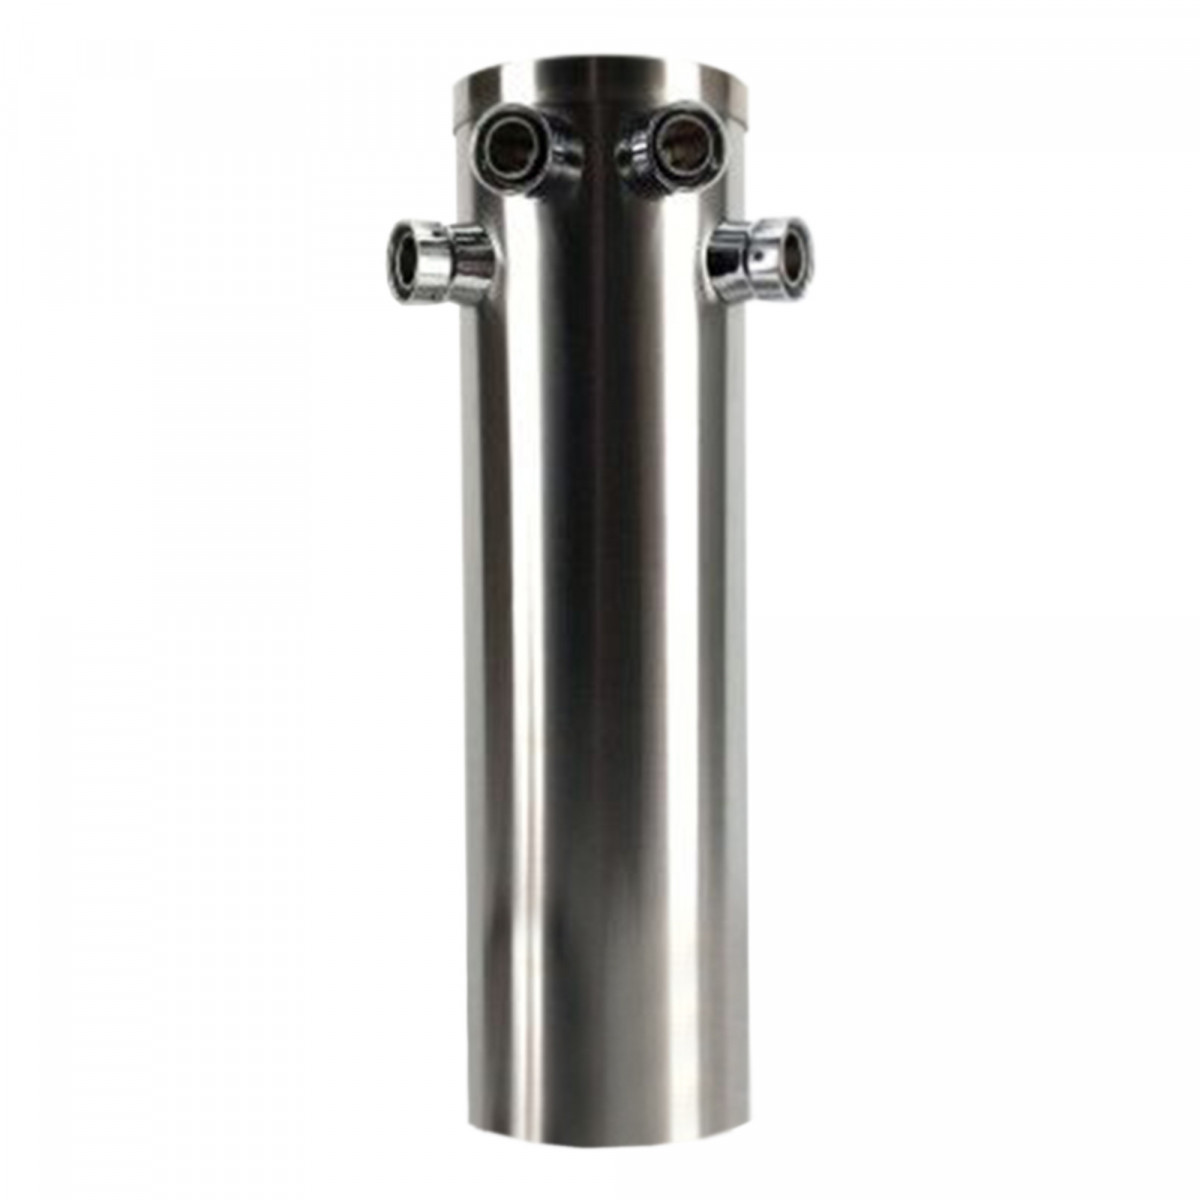 Quadruple beer tap tower - brushed stainless steel